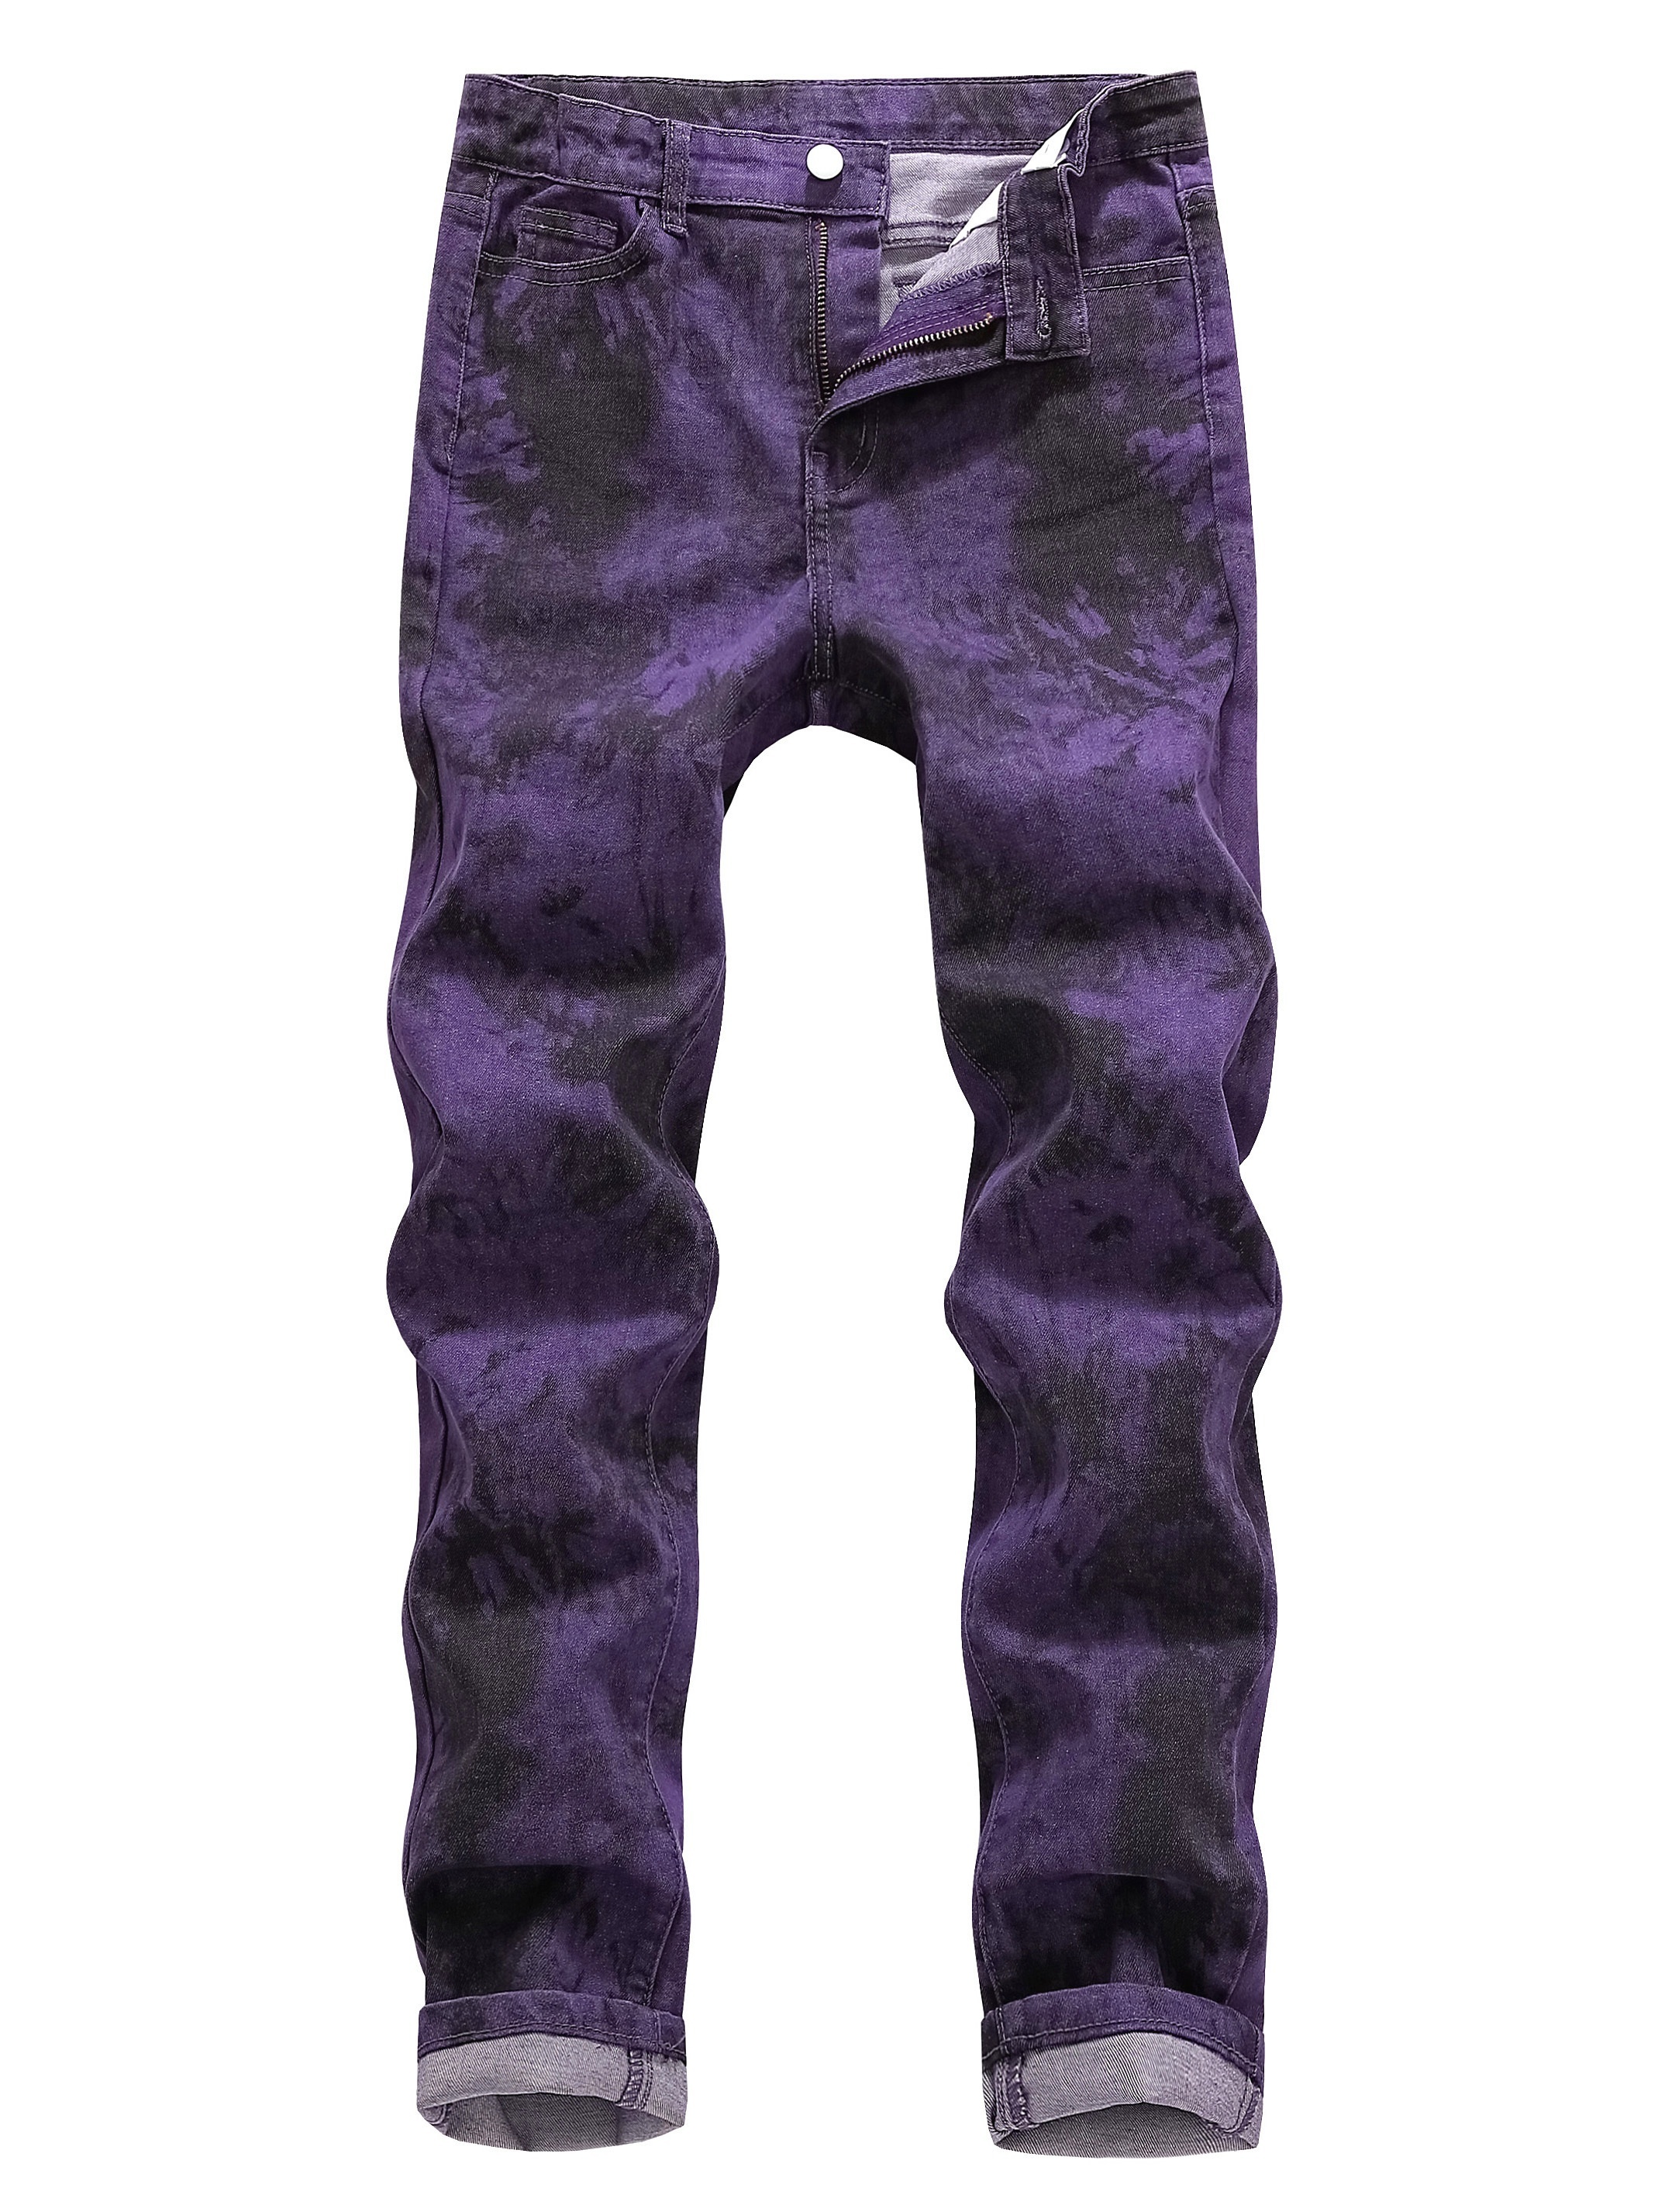 Purple Jeans Men Tag Unisex Mens Designer Ripped Skinny Pants for Washed  Old Clothes Pantalones Luxury Brand 4miv